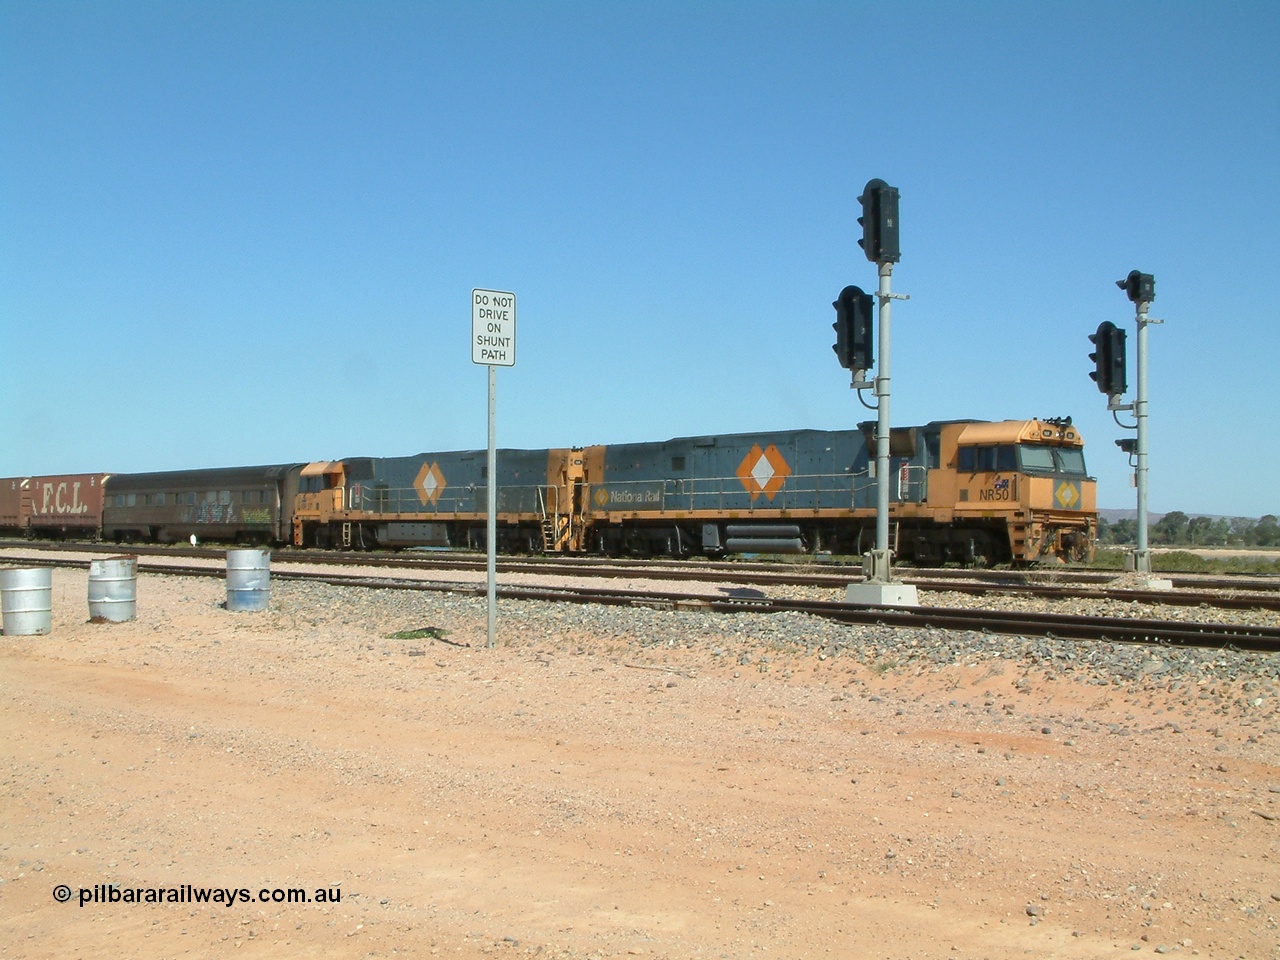 030404 125029
Port Augusta Spencer Junction yard, a Perth bound intermodal awaits departure time on 13 Road behind National Rail NR class units built by Goninan as GE Cv40-9i models, NR 50 serial 7250-08 / 97-252 and NR 37 serial 7250-06 / 97-239. 4th April 2003.
Keywords: NR-class;NR50;Goninan;GE;Cv40-9i;7250-08/97-252;